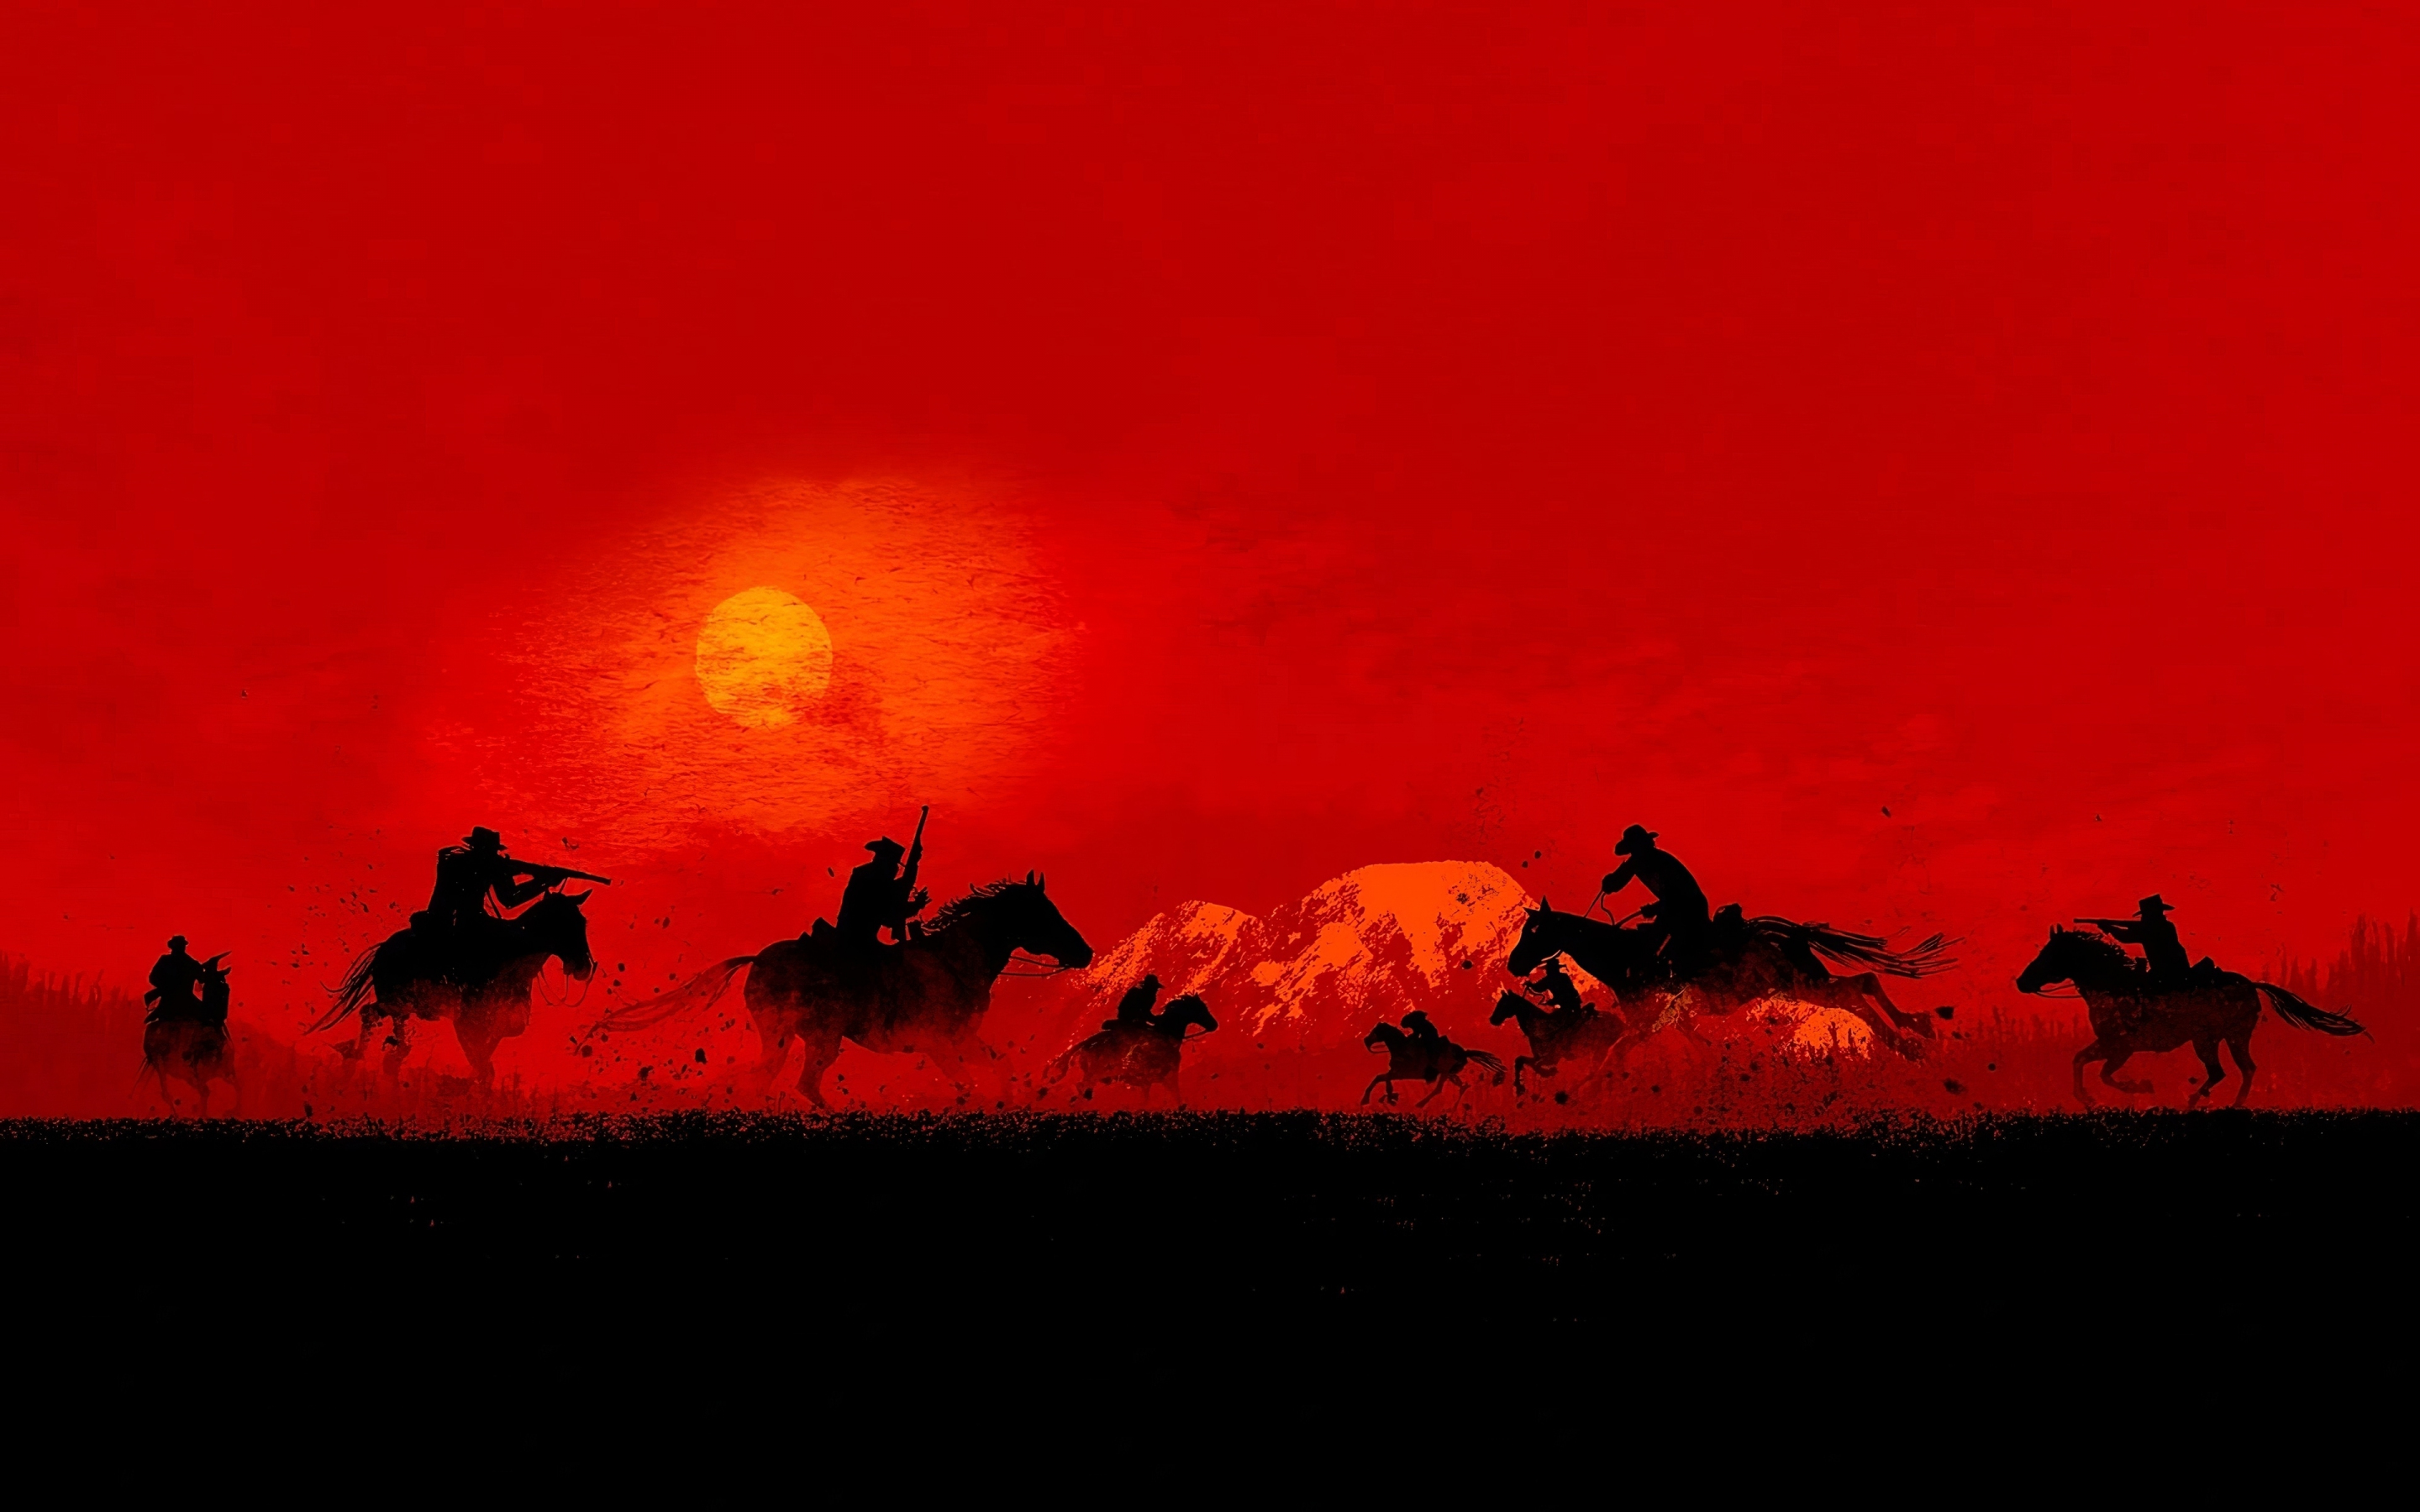 Red Dead Redemption 2, cowboys, game, 2019, 2880x1800 wallpaper